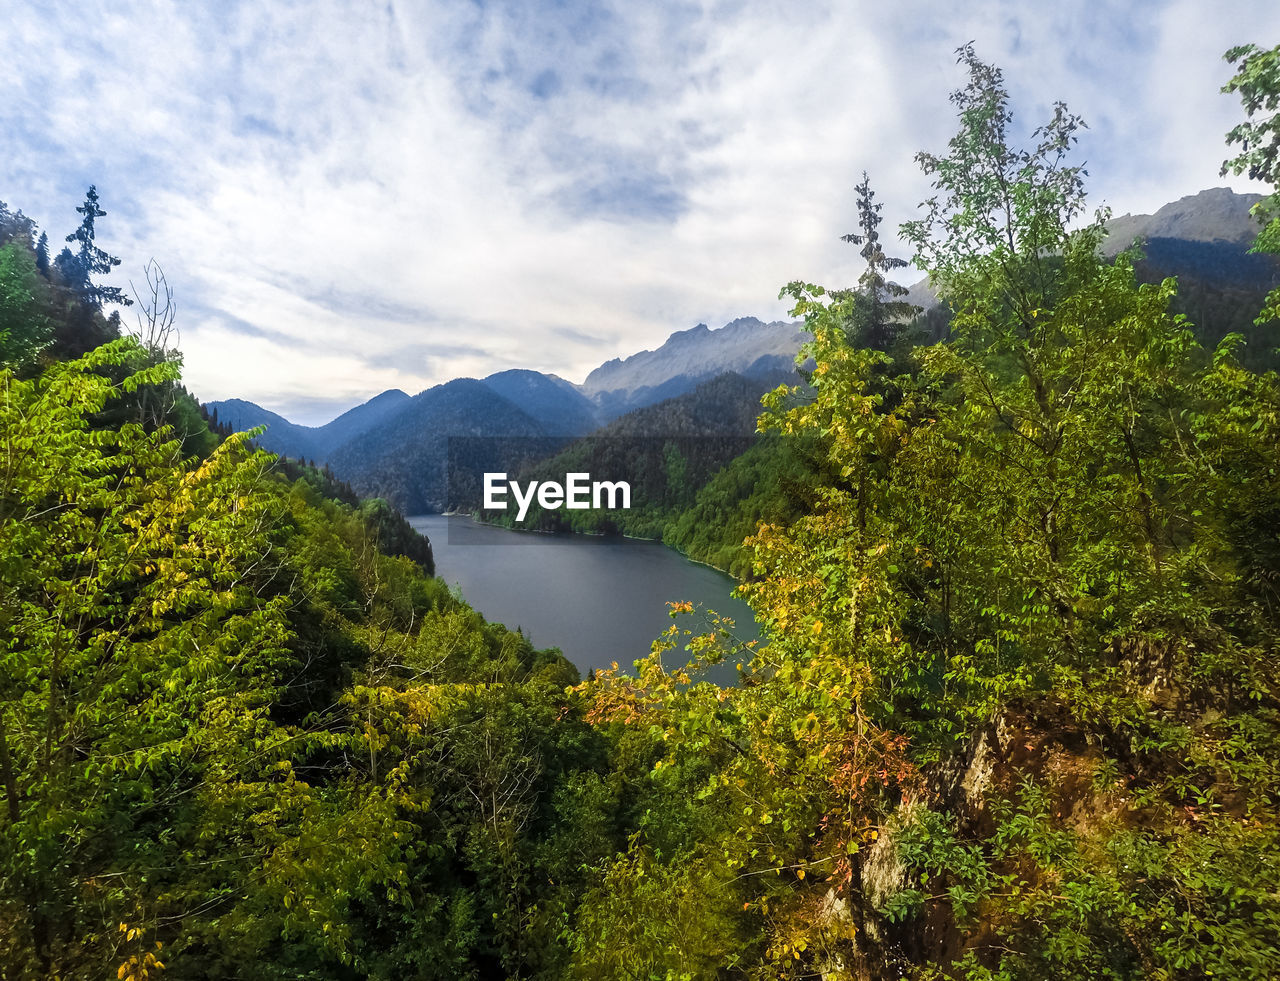 SCENIC VIEW OF LAKE AMIDST TREES AGAINST SKY